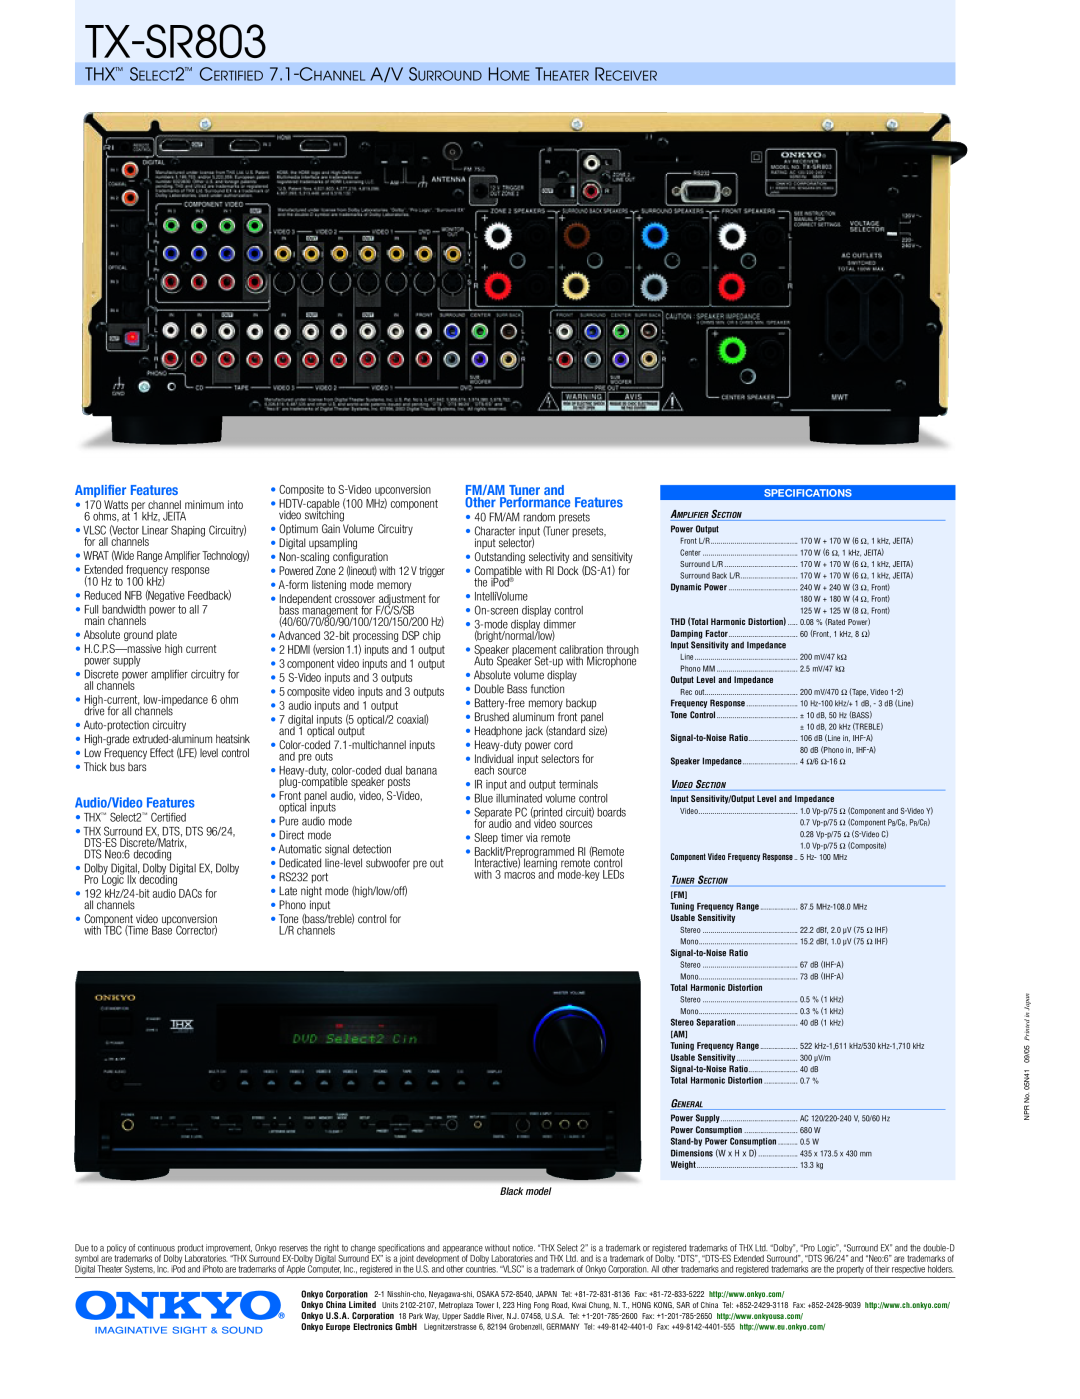 Onkyo manual Amplifier Features, Audio/Video Features, FM/AM Tuner and, TX-SR803, Other Performance Features 